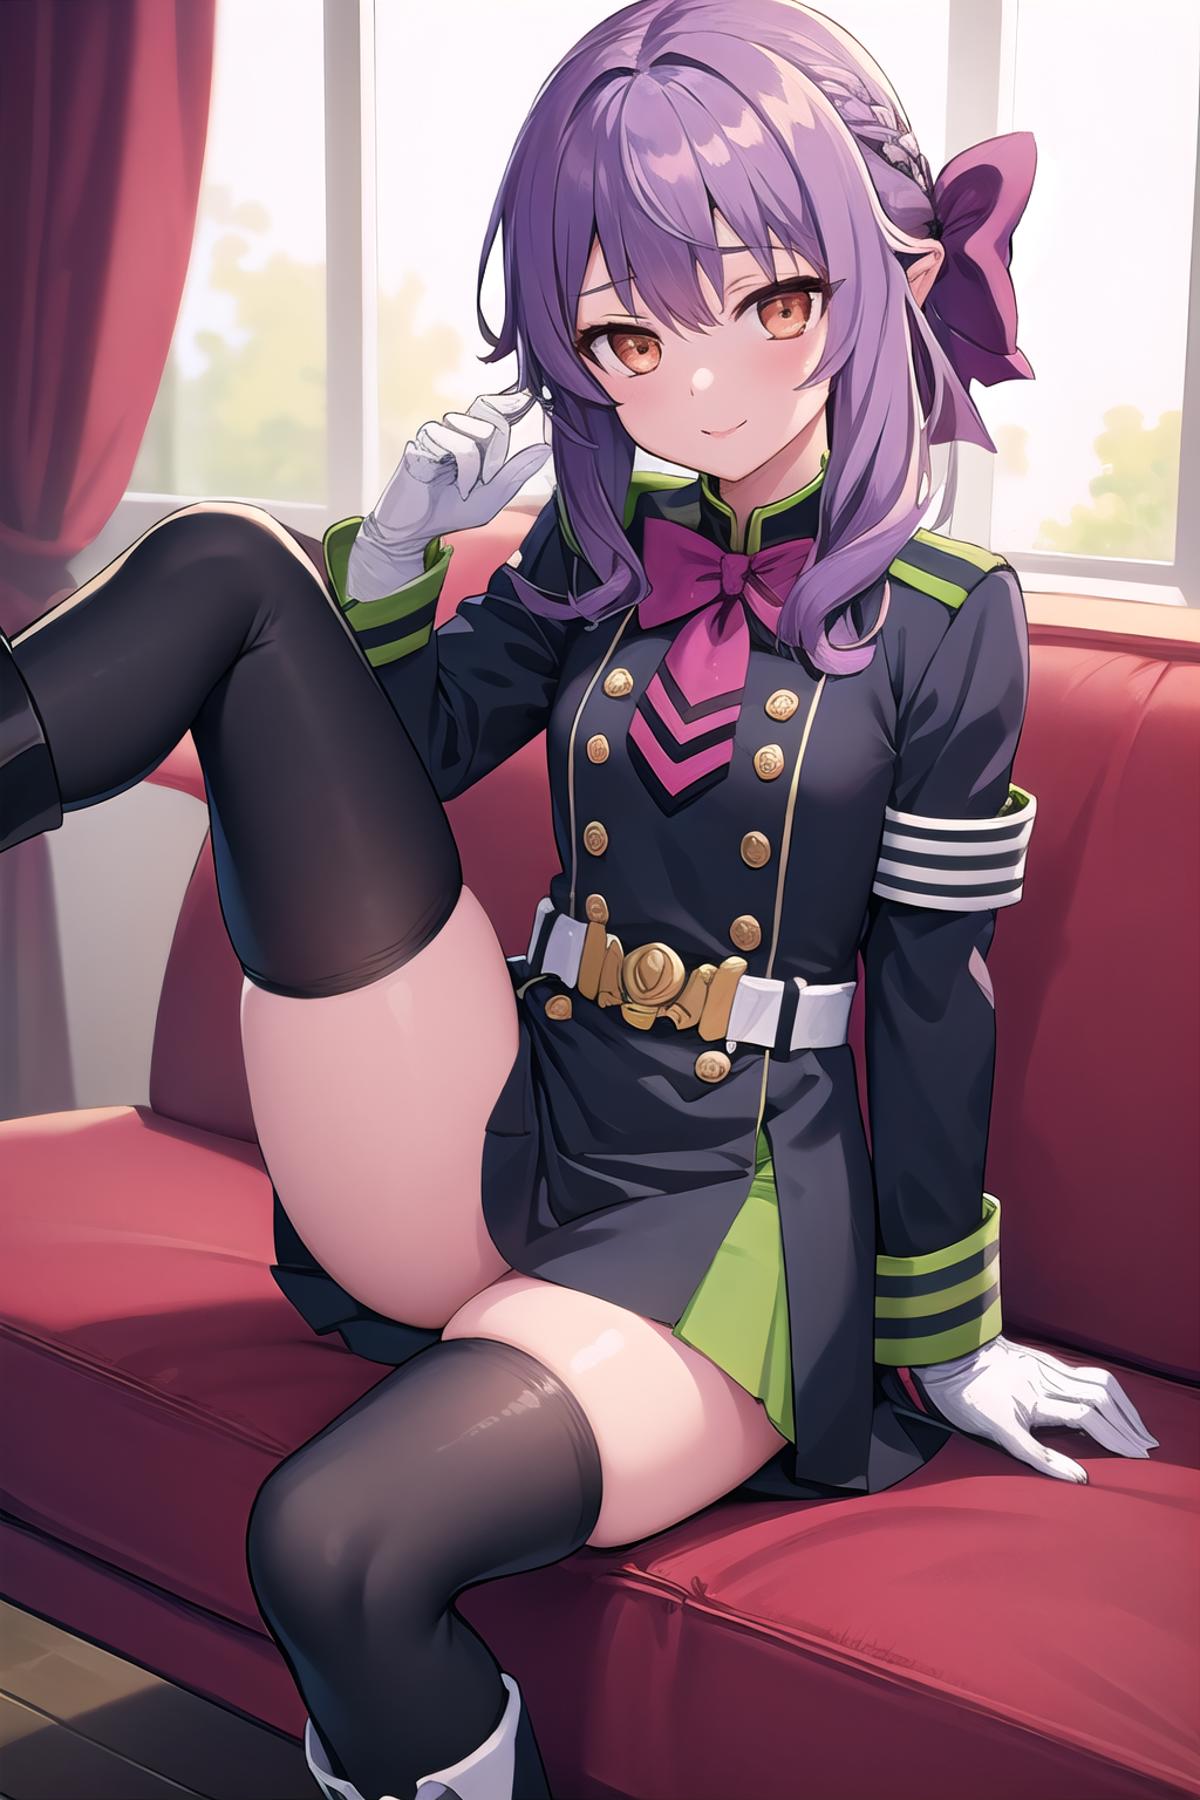 A cartoon character wearing a military uniform with a bow tie, sitting on a couch.